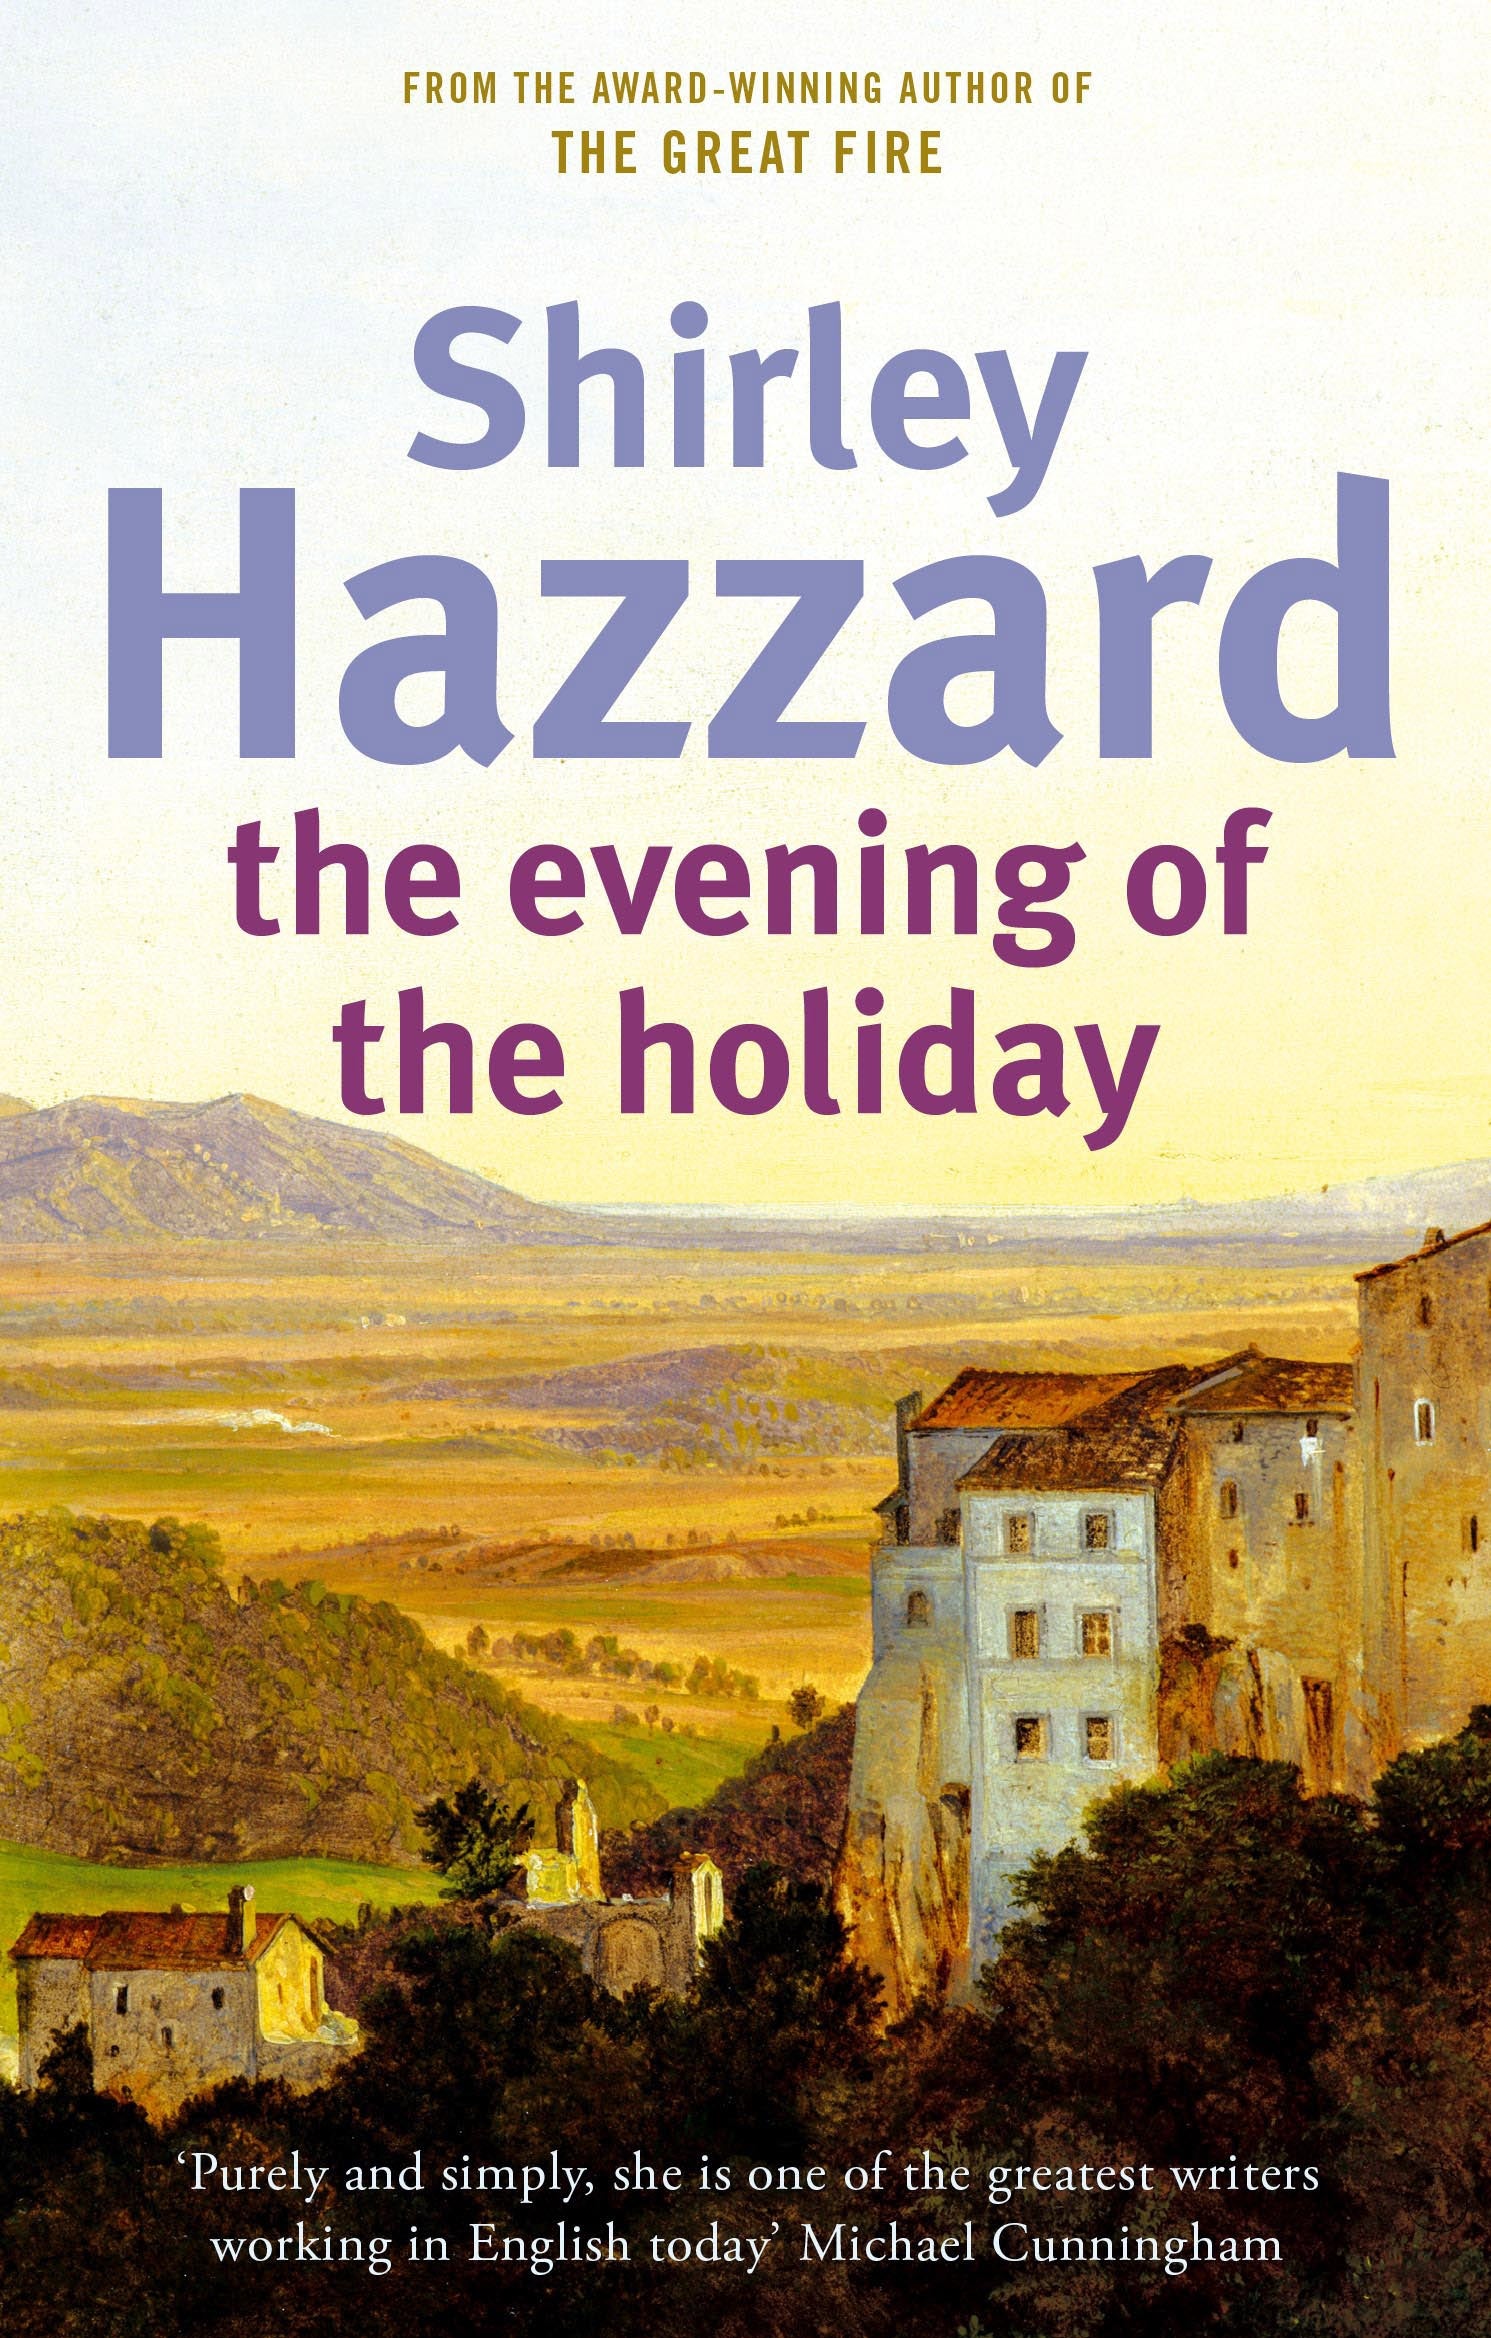 The Evening Of The Holiday by Shirley Hazzard